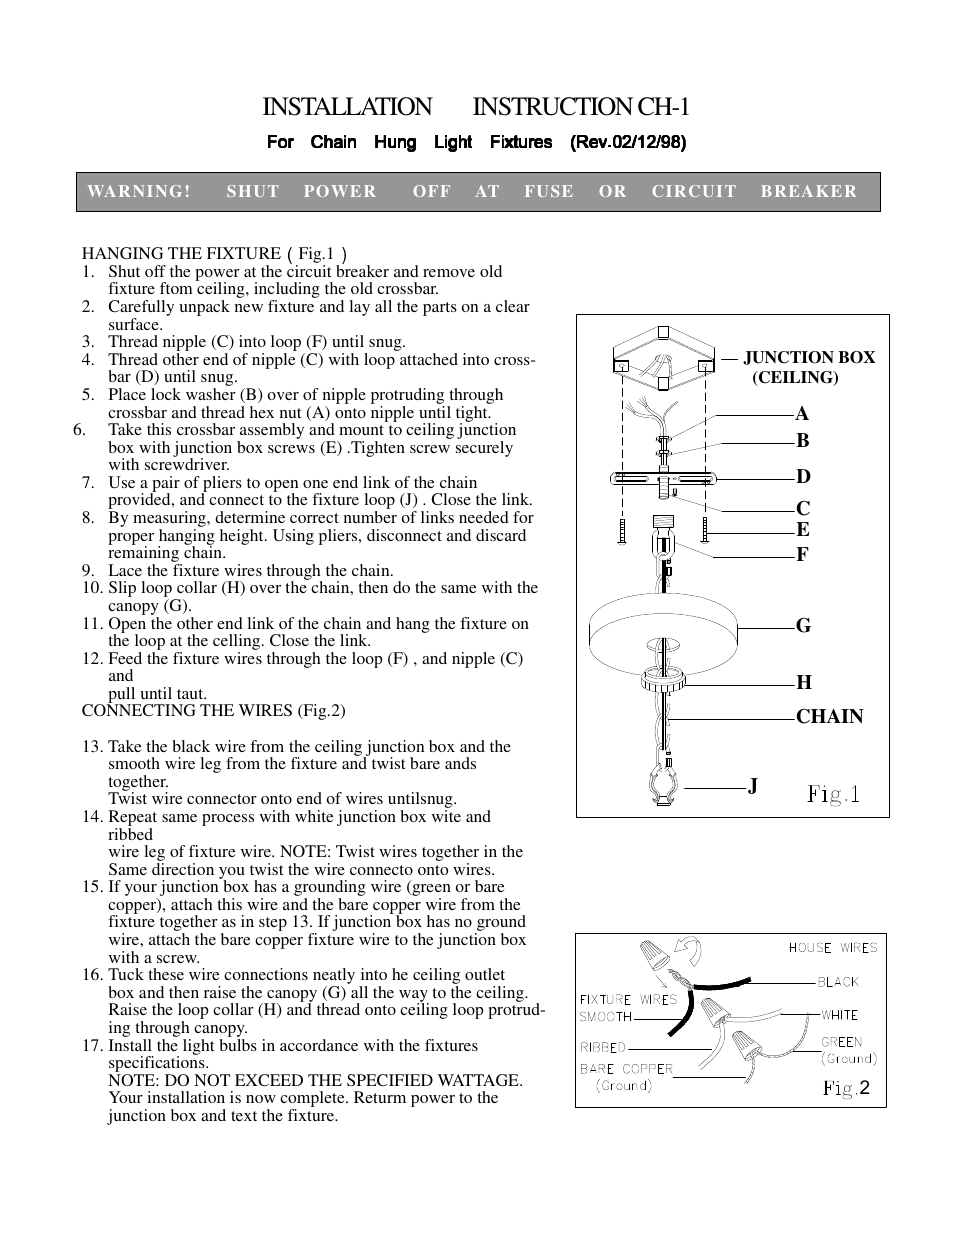 Golden Lighting 3890-D5 GB User Manual | 2 pages